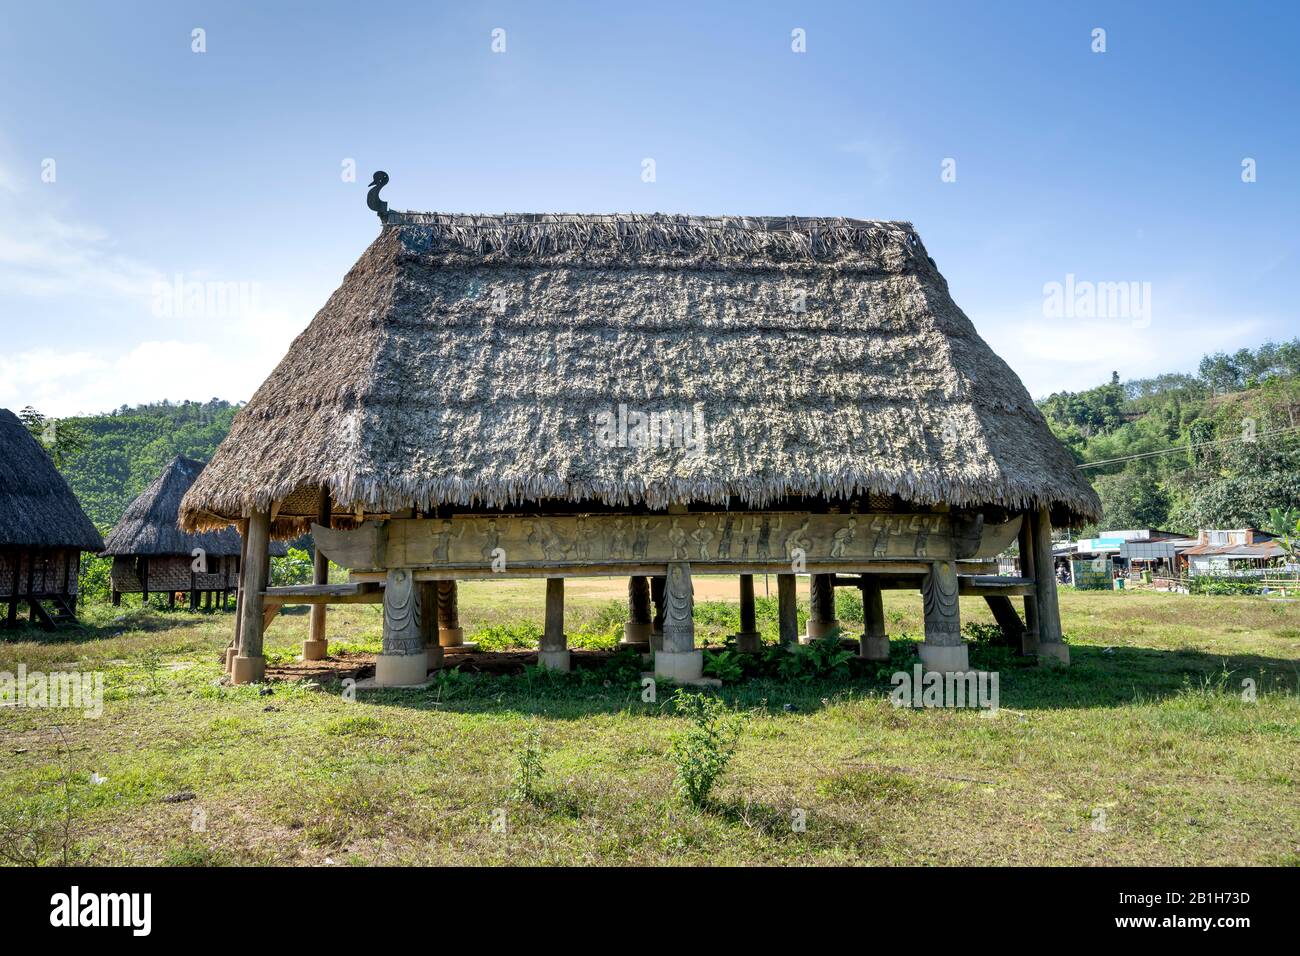 Thua Thien Hue Province, Vietnam - January 12, 2020: Photos of communal houses of ethnic minorities in Thua Thien Hue Province, Vietnam. The communal Stock Photo